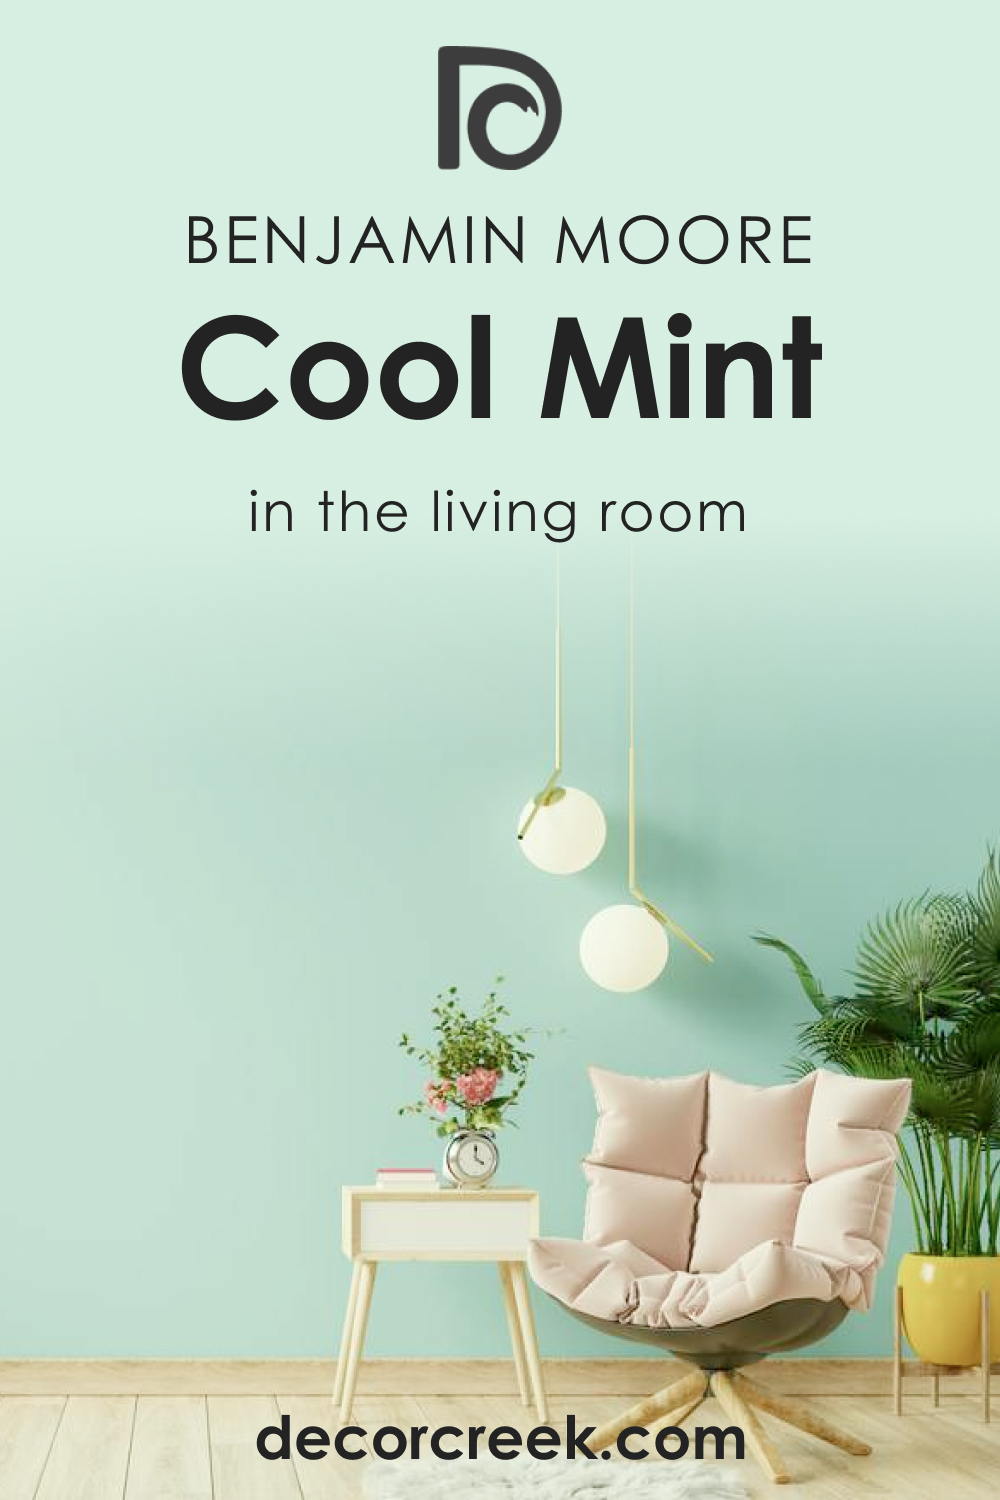 How to Use Cool Mint 582 in the Living Room?